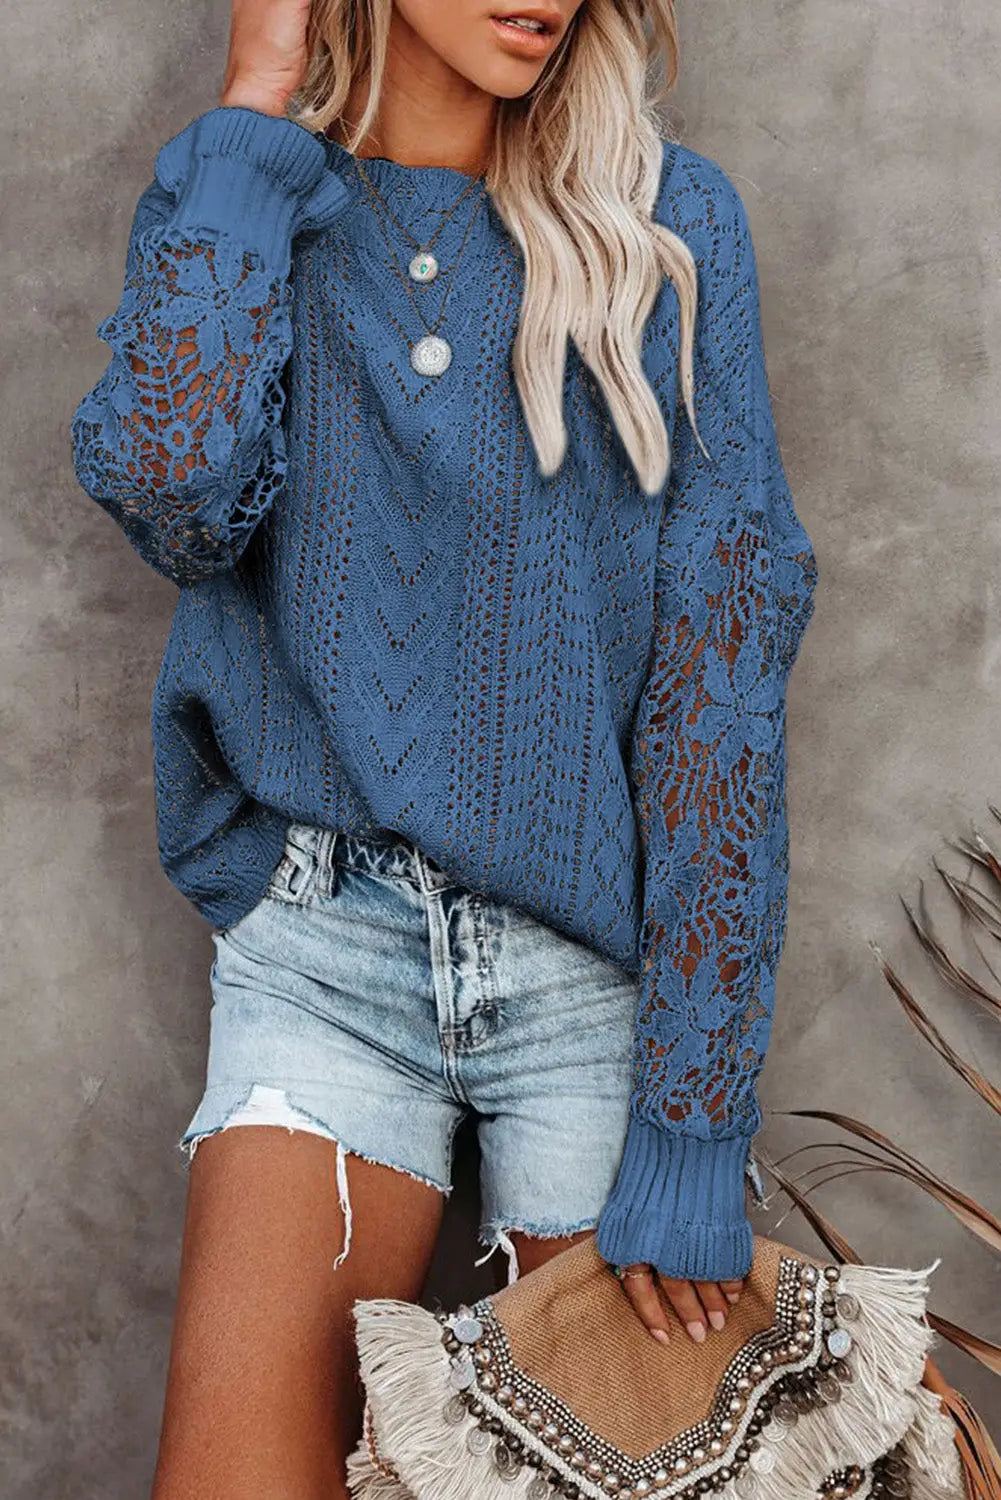 Blue crochet lace pointelle knit sweater - s / 55% acrylic + 45% cotton - sweaters & cardigans